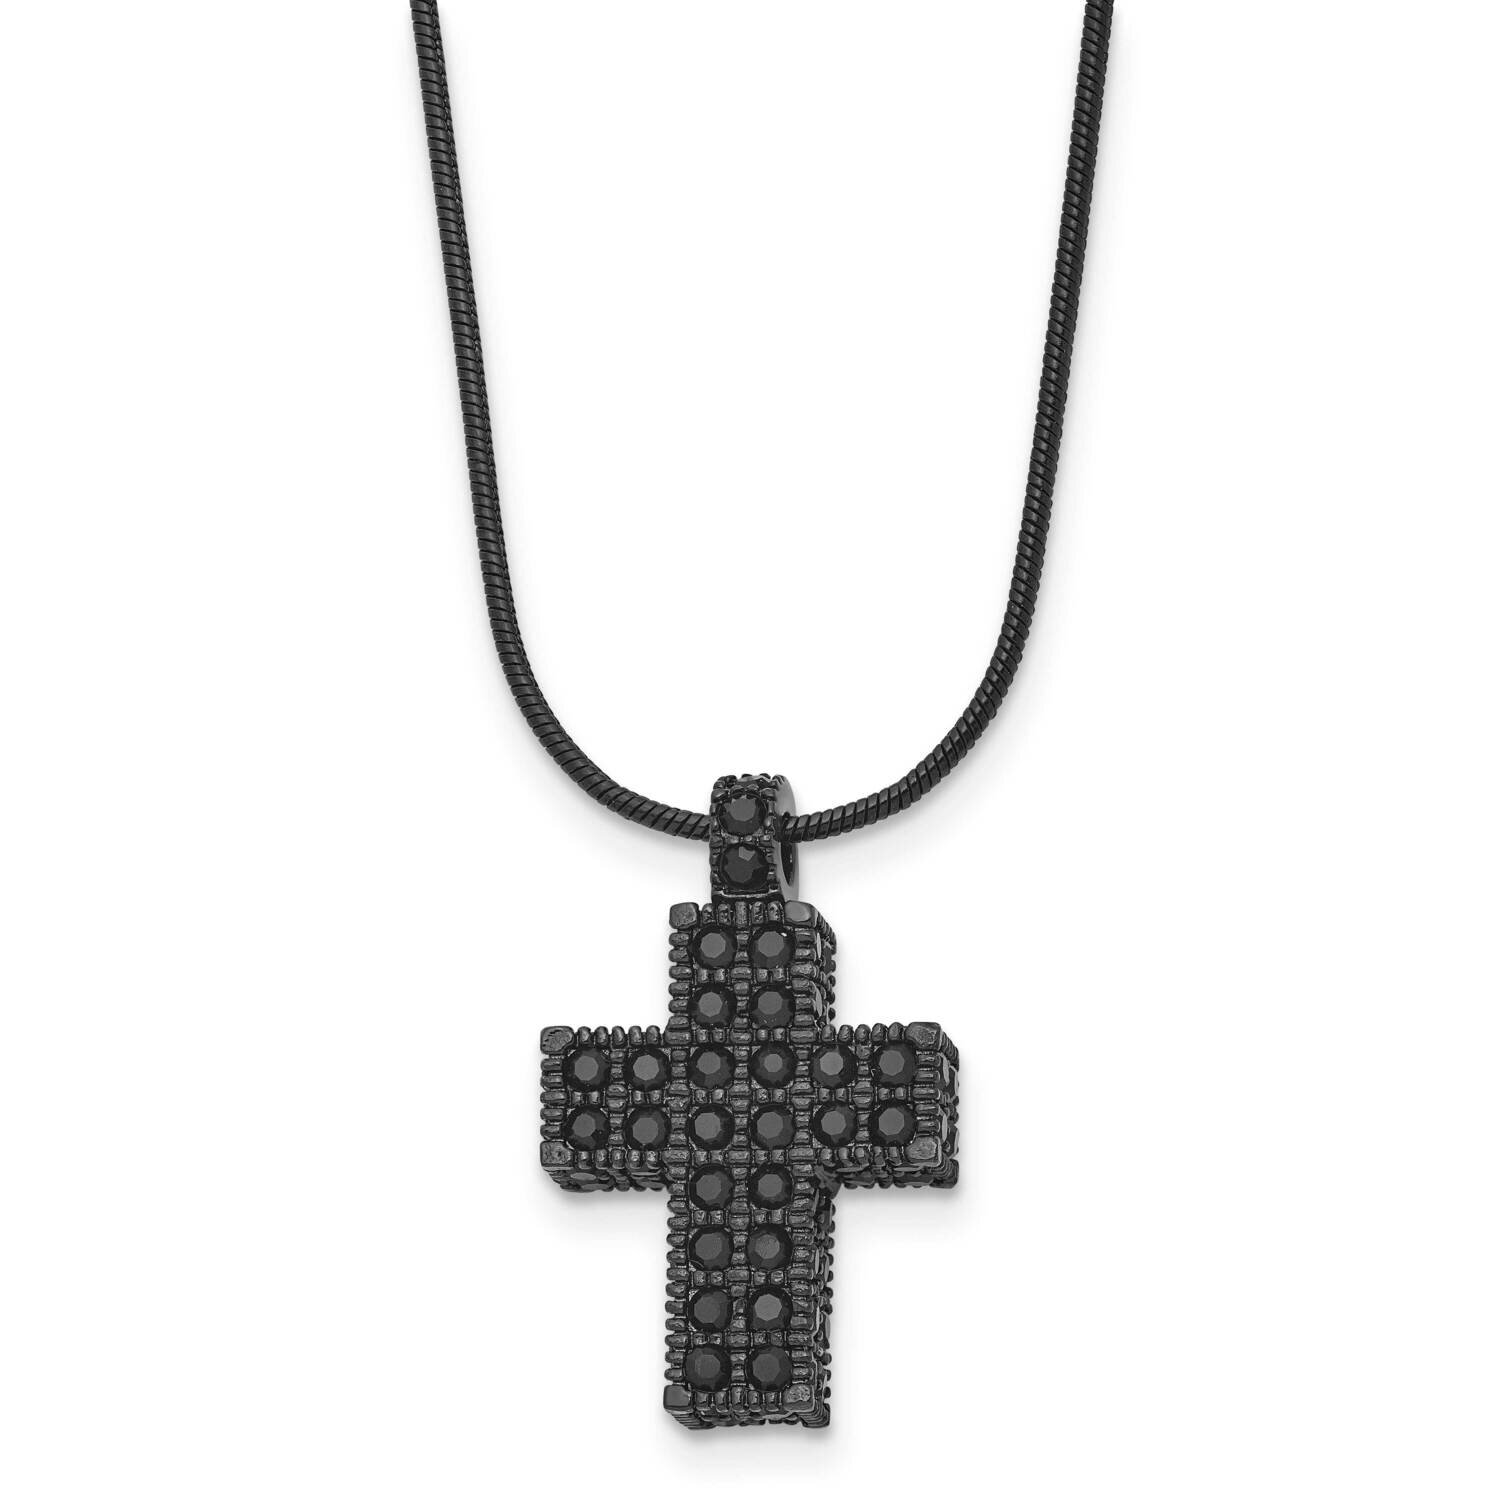 Black IP-plated Black Crystal Cross 2 Inch Extension Necklace Stainless Steel SRN1698-17.75